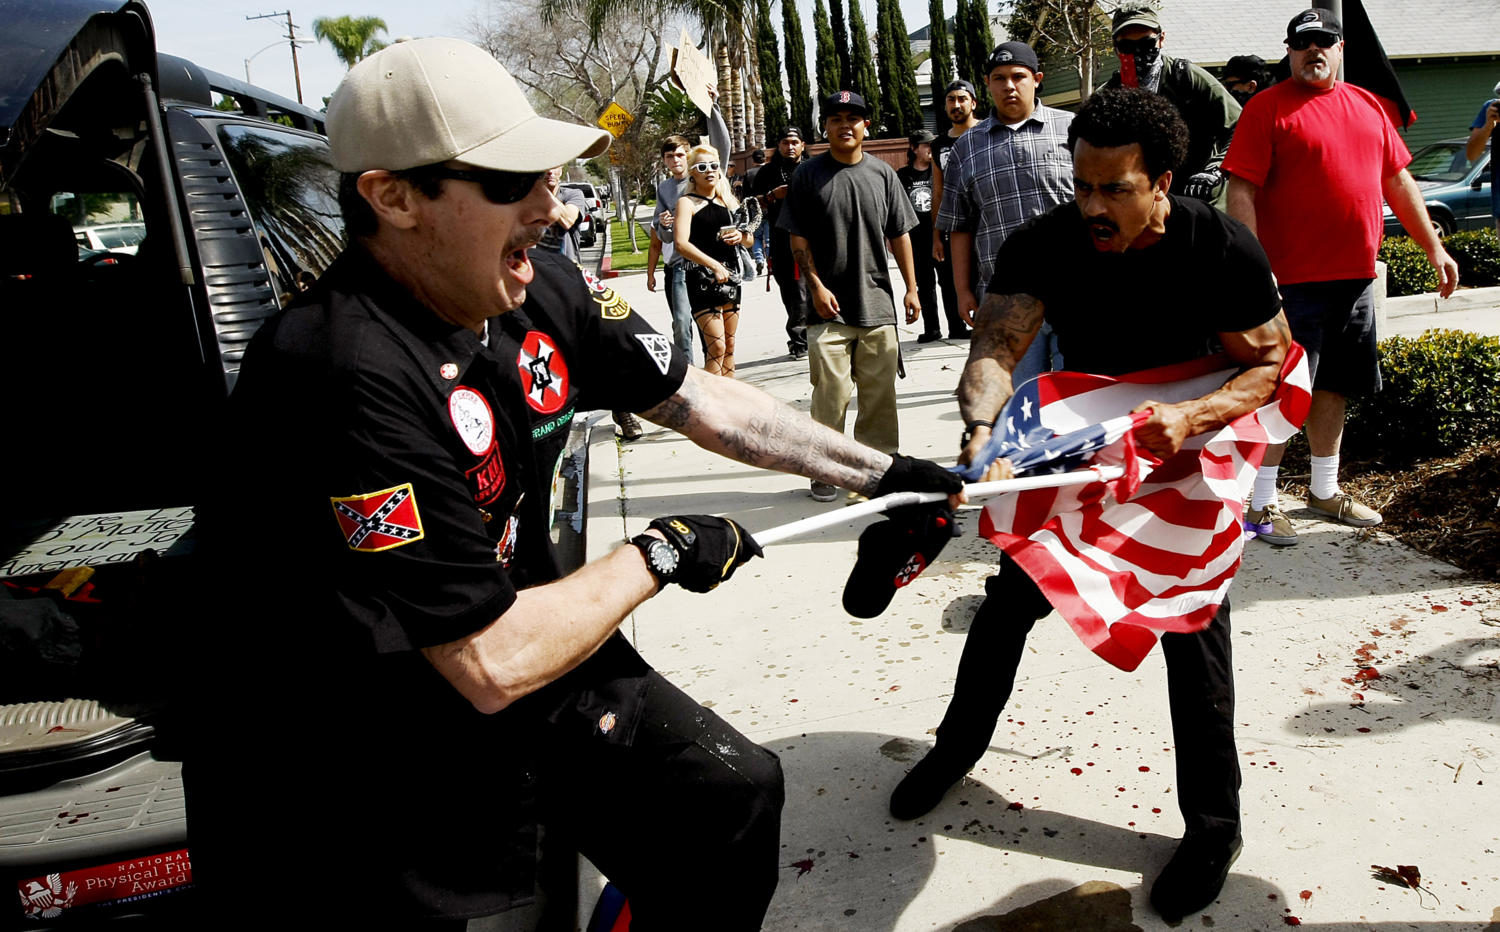 A Ku Klux Klansman, William Hagen, left, fights a counterprotester for an American flag after members of the KKK tried to start a White Lives Matter rally on Feb. 27, 2016 at Pearson Park in Anaheim, Calif. California might not seem an ideal place for the extreme-right and white-nationalist groups to make a stand. But the movement has increasingly targeted the state in recent years. (Luis Sinco/Los Angeles Times/TNS)